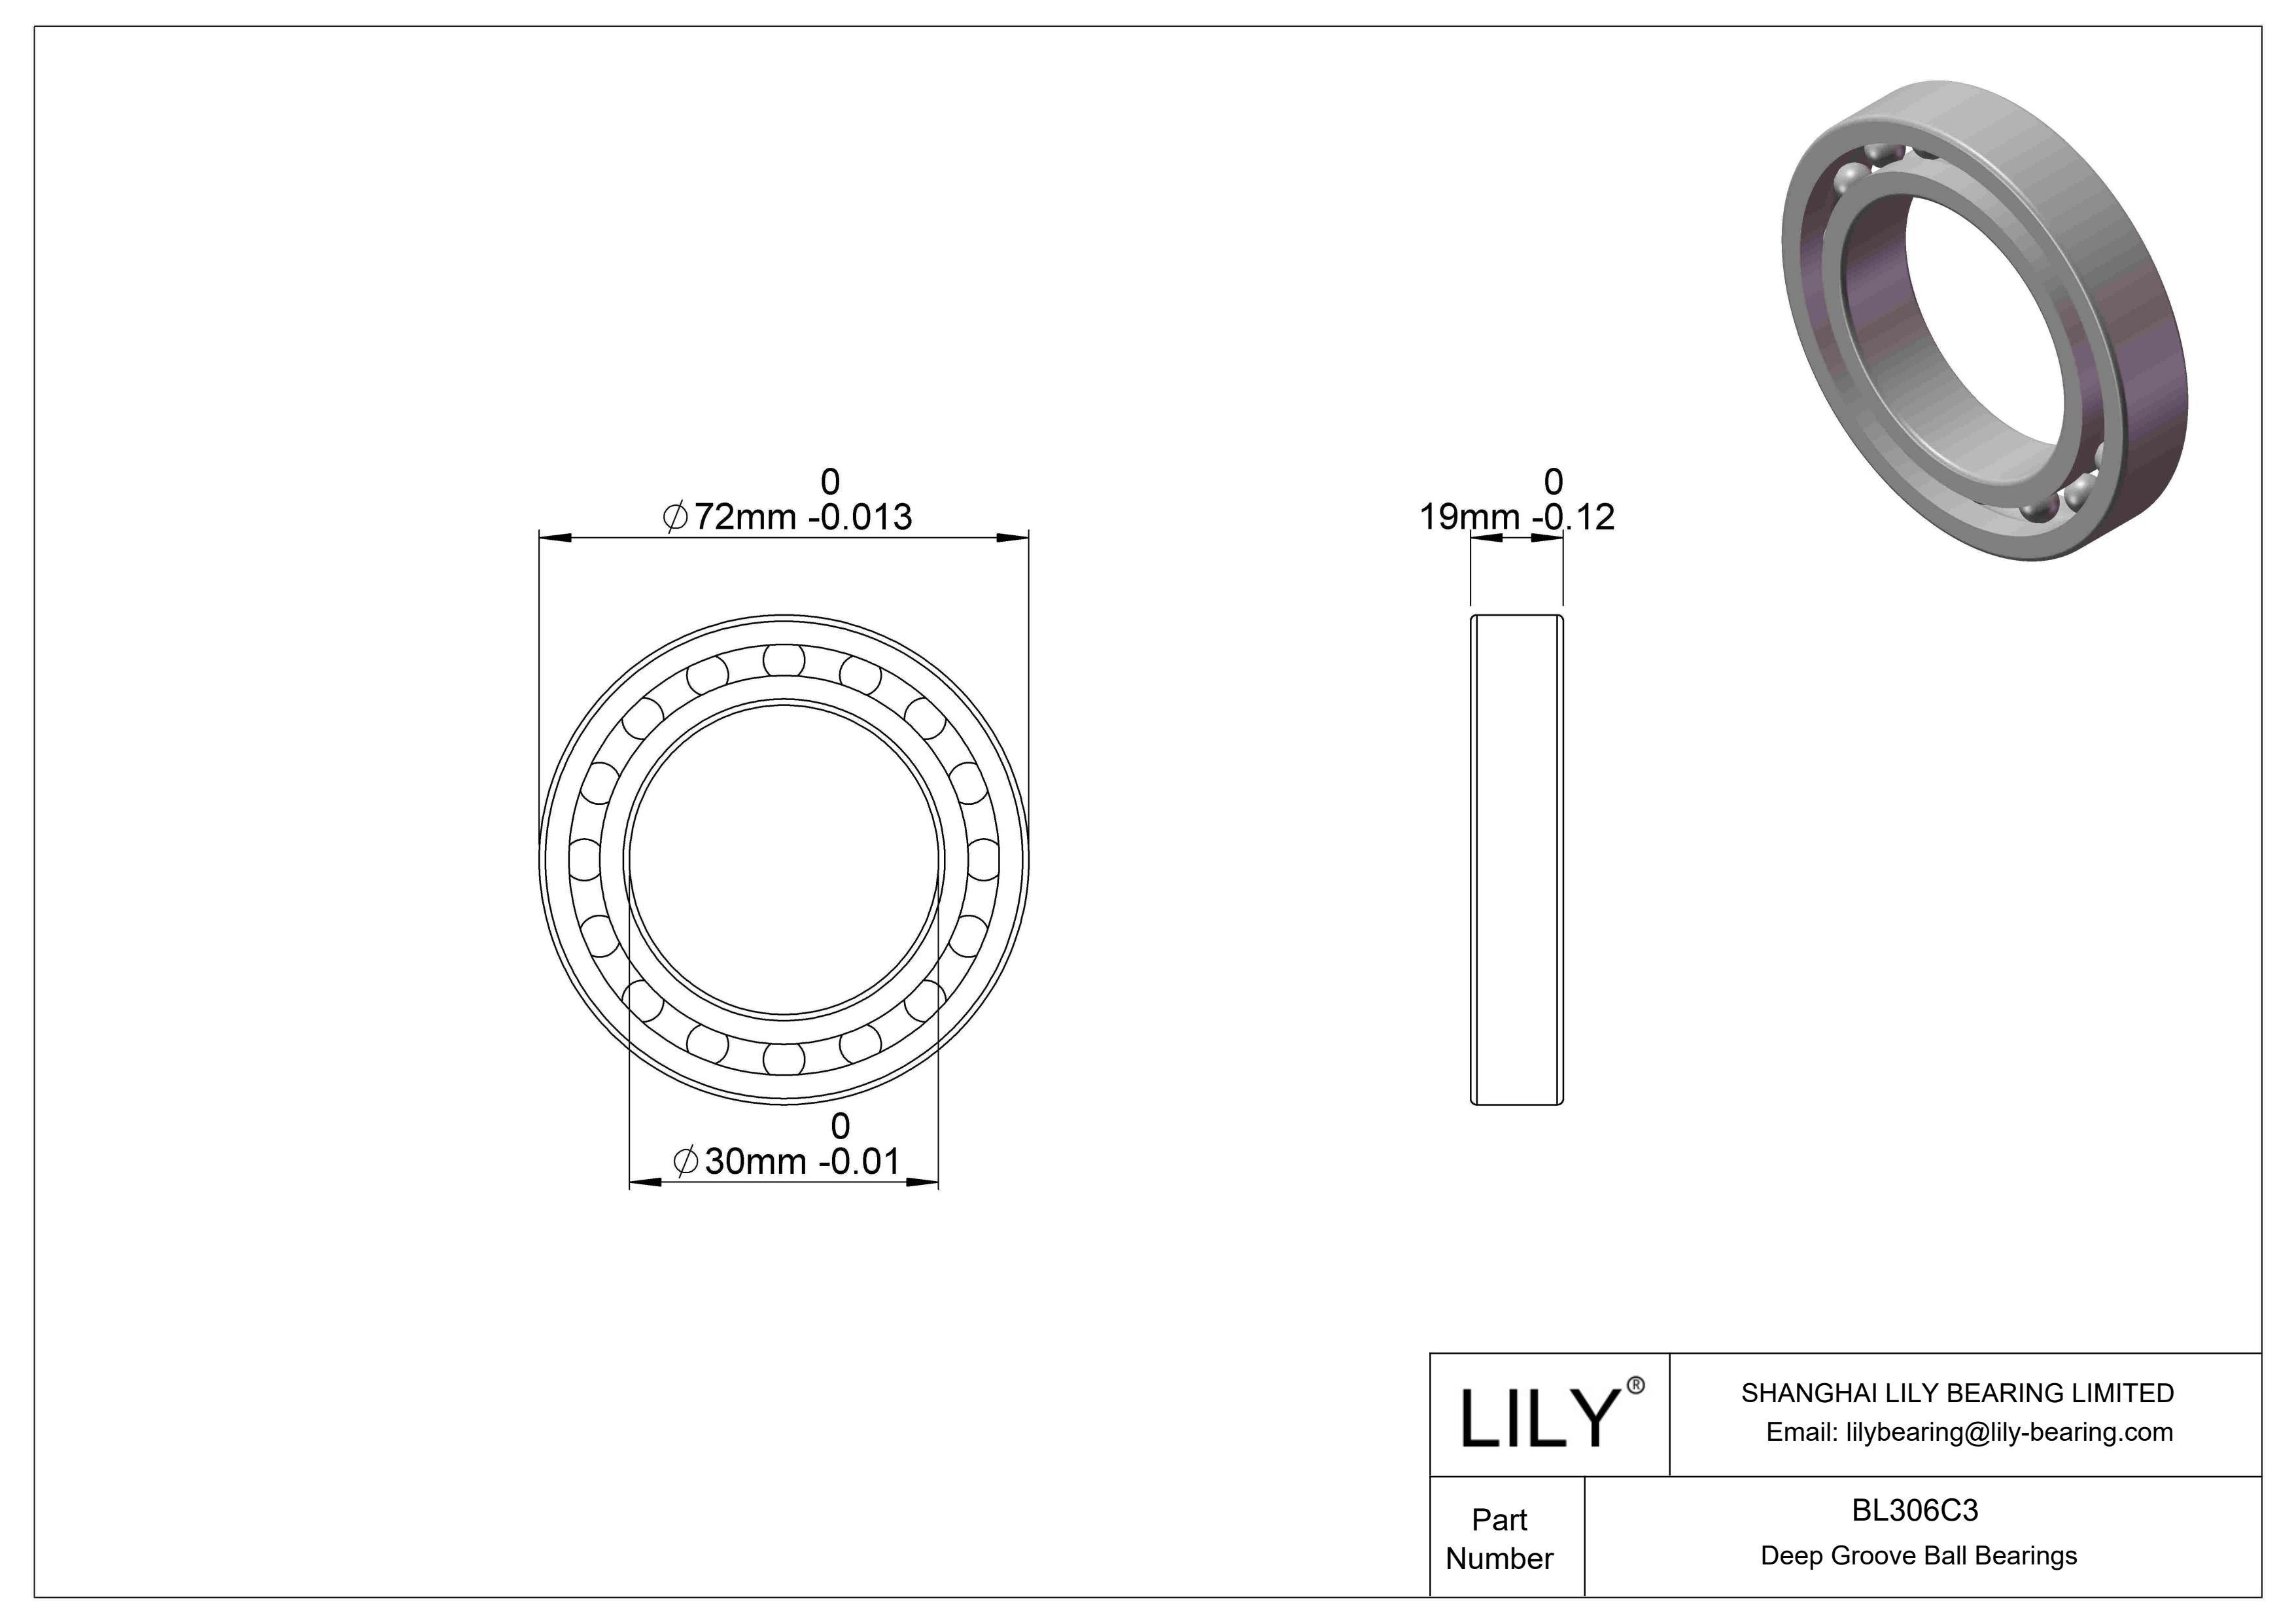 BL306C3 General Deep Groove Ball Bearing cad drawing